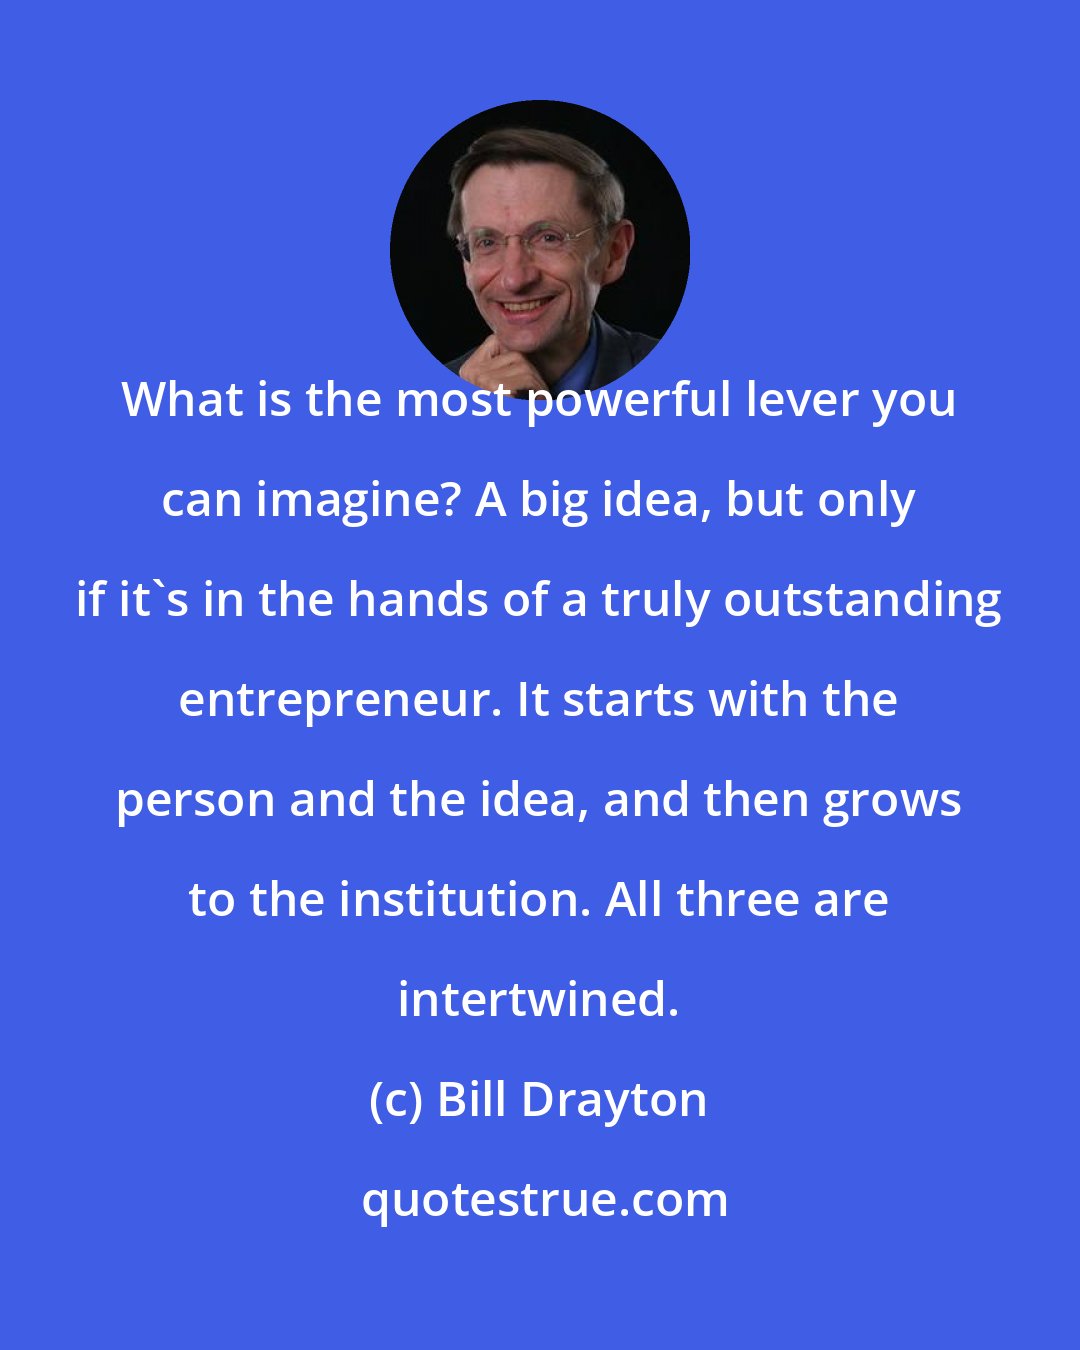 Bill Drayton: What is the most powerful lever you can imagine? A big idea, but only if it's in the hands of a truly outstanding entrepreneur. It starts with the person and the idea, and then grows to the institution. All three are intertwined.